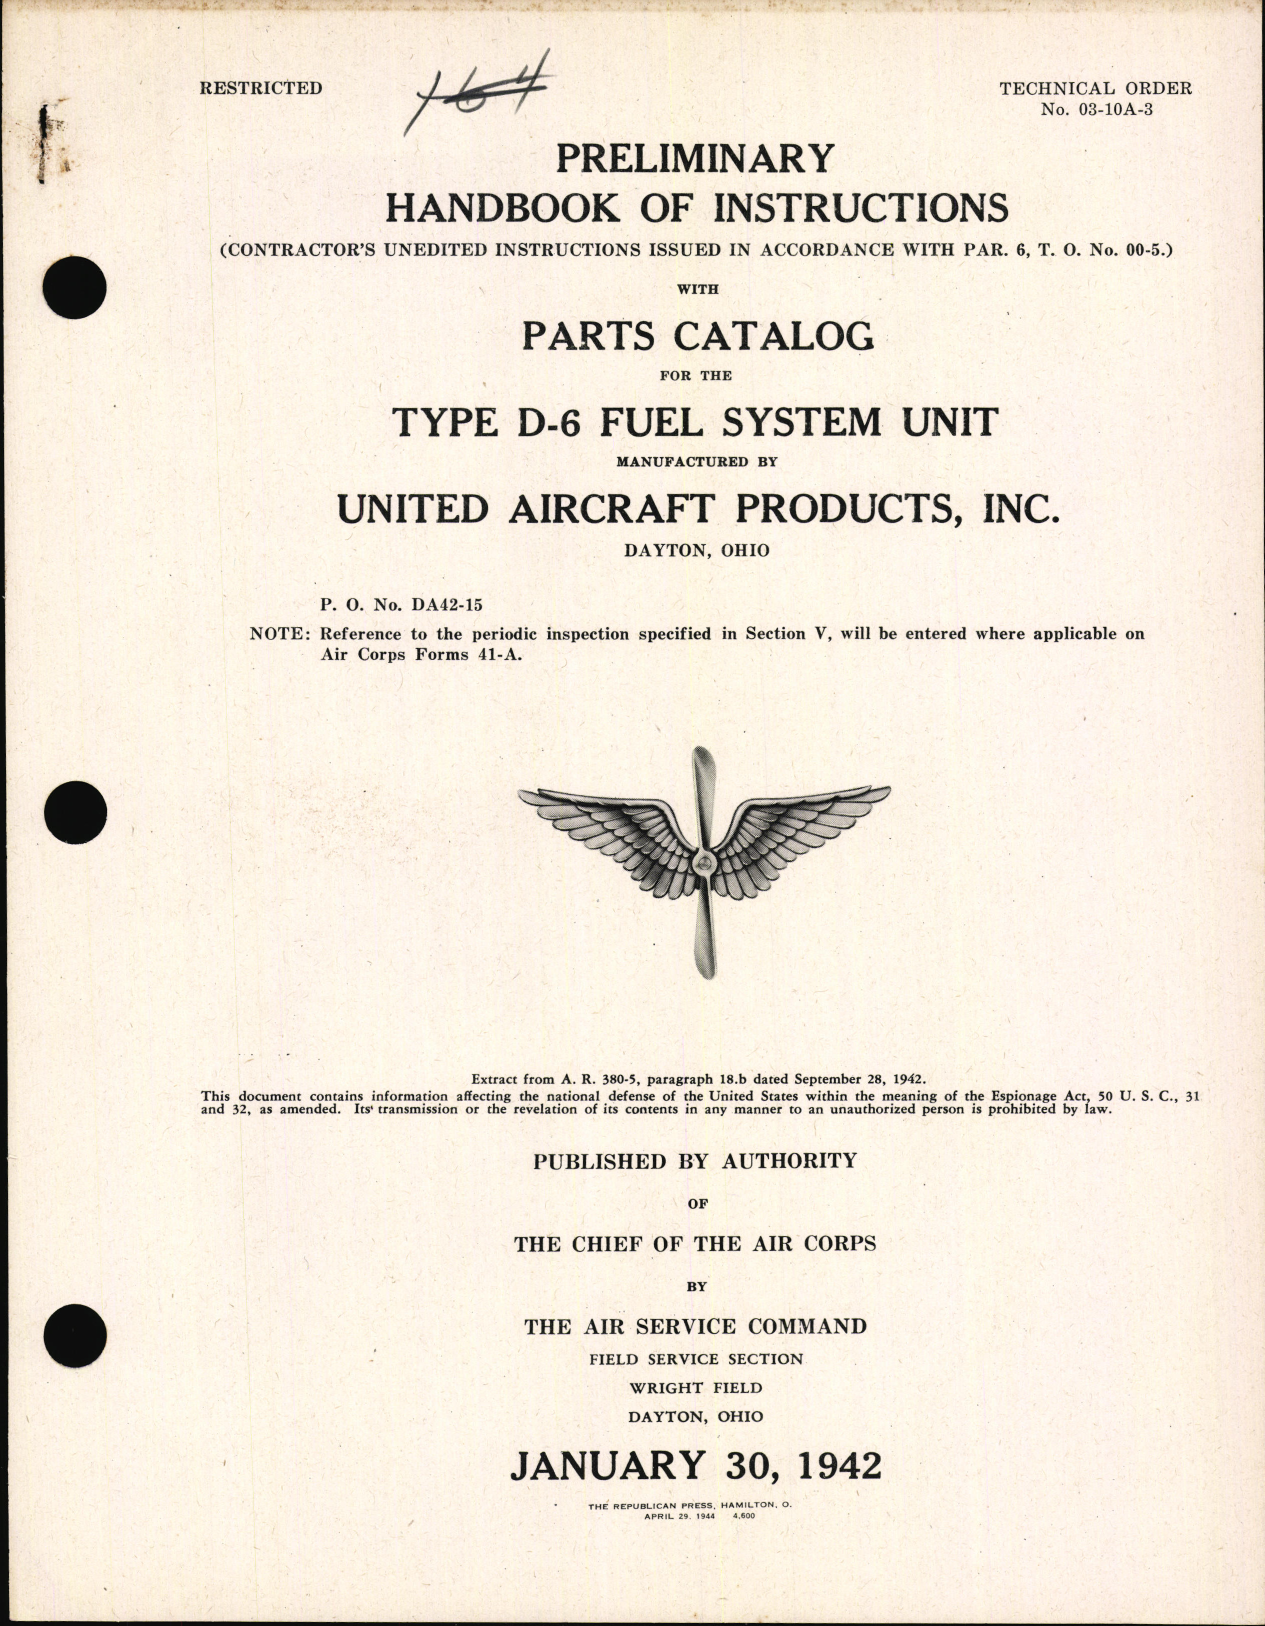 Sample page 1 from AirCorps Library document: Preliminary Handbook of Instructions with Parts Catalog for Type D-6 Fuel System Unit